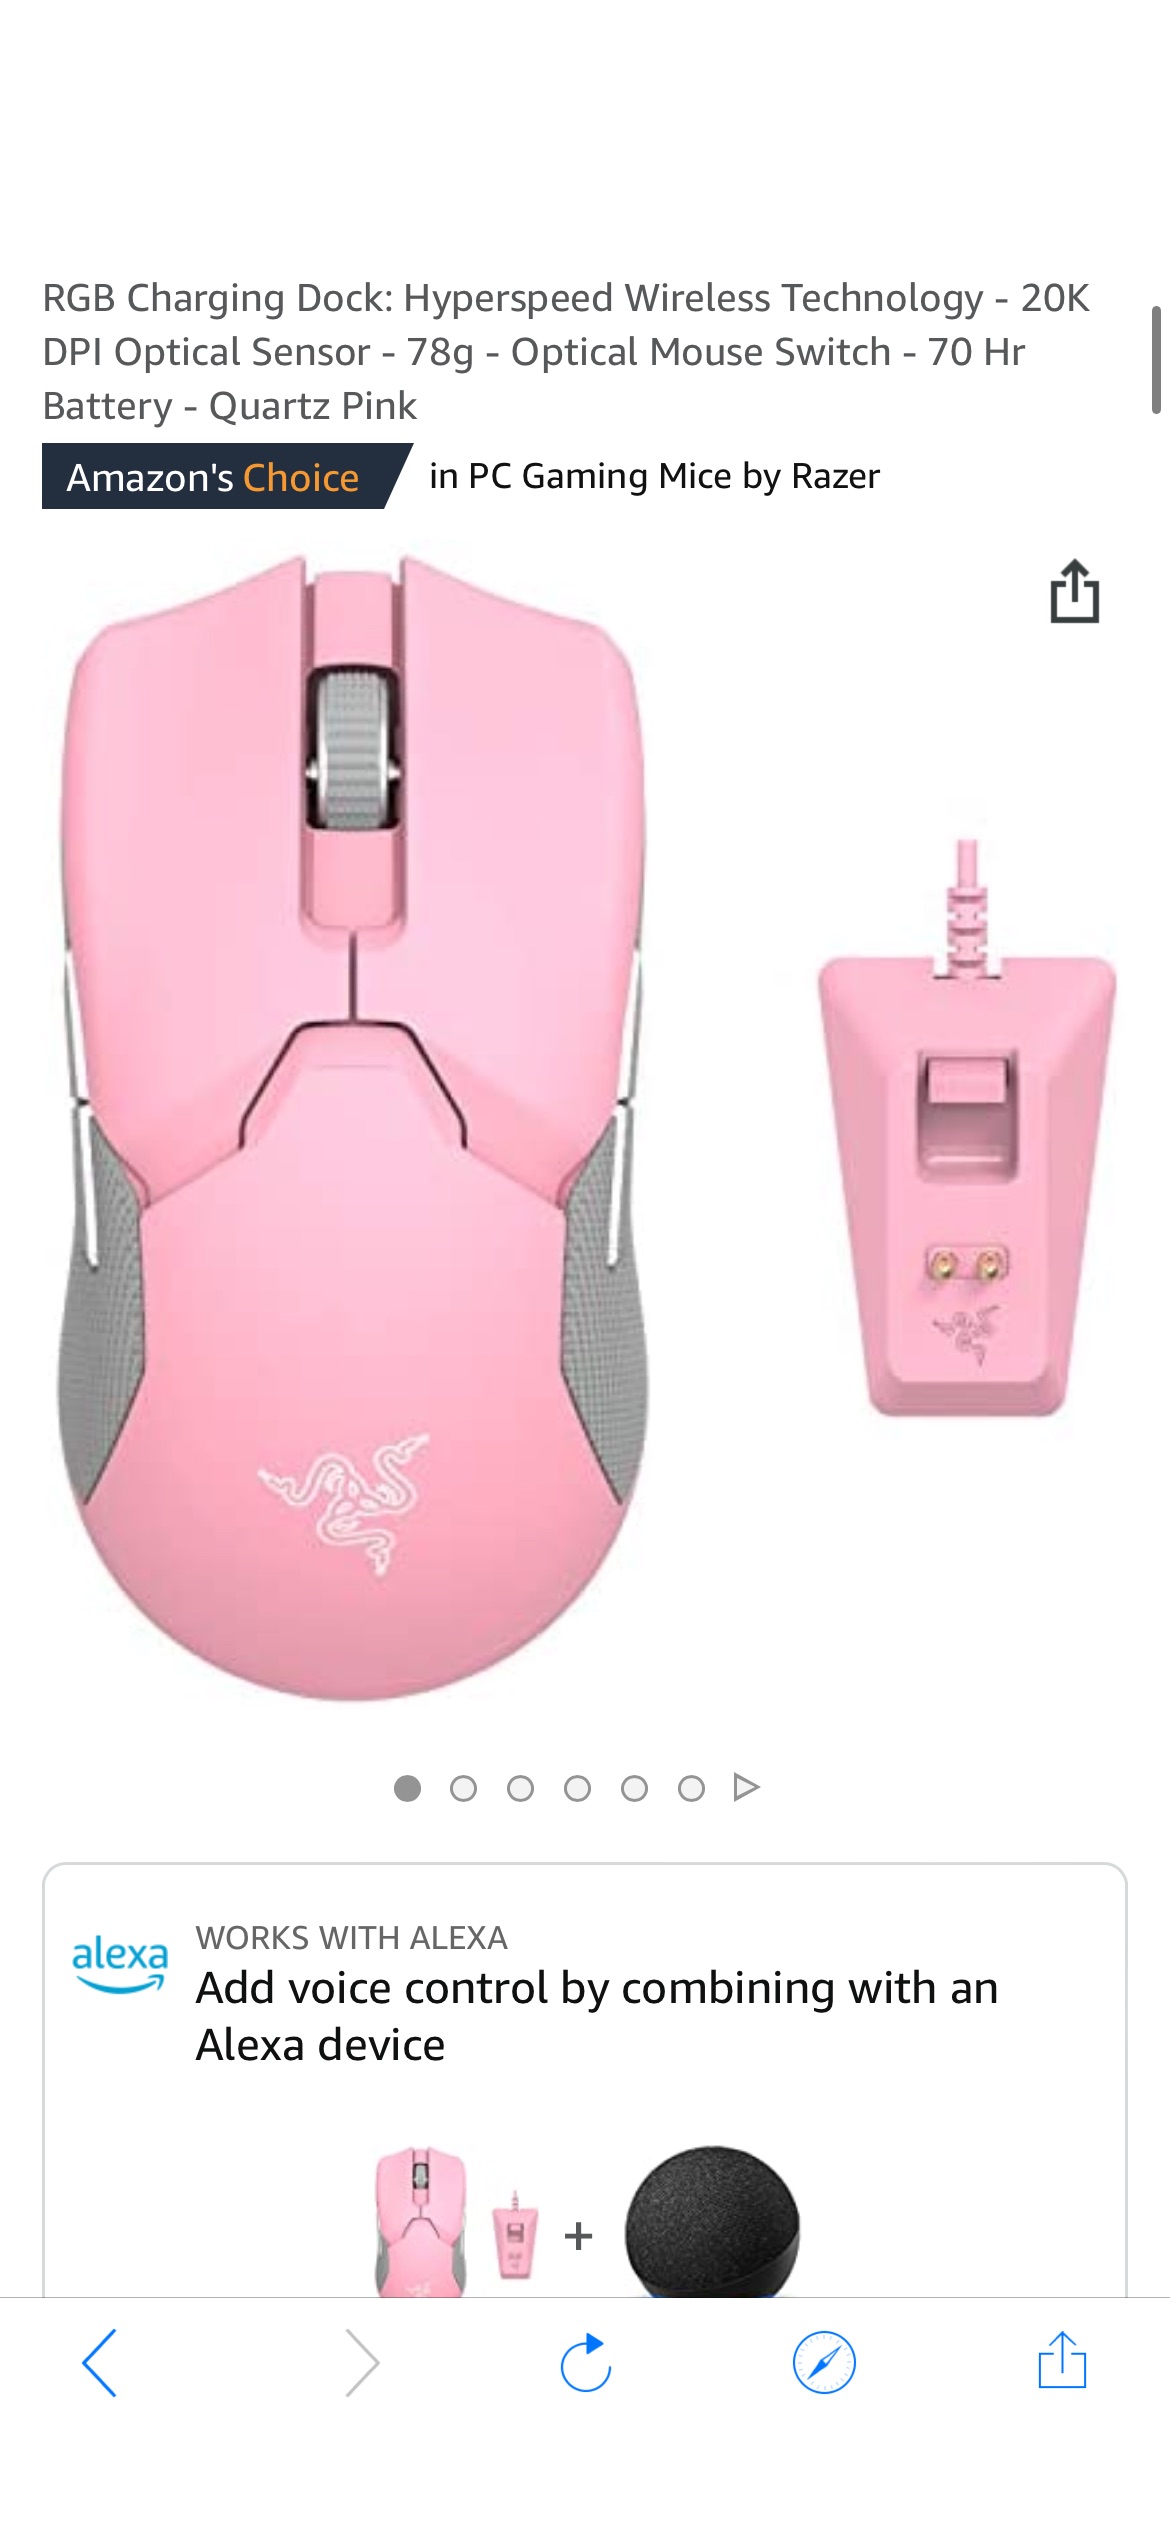 Razer Viper Ultimate Lightweight Wireless Gaming Mouse: Fastest Gaming Switches - 20K DPI Optical Sensor - Chroma Lighting - 8 Programmable Buttons - 70 Hr Battery - Classic Black 鼠标